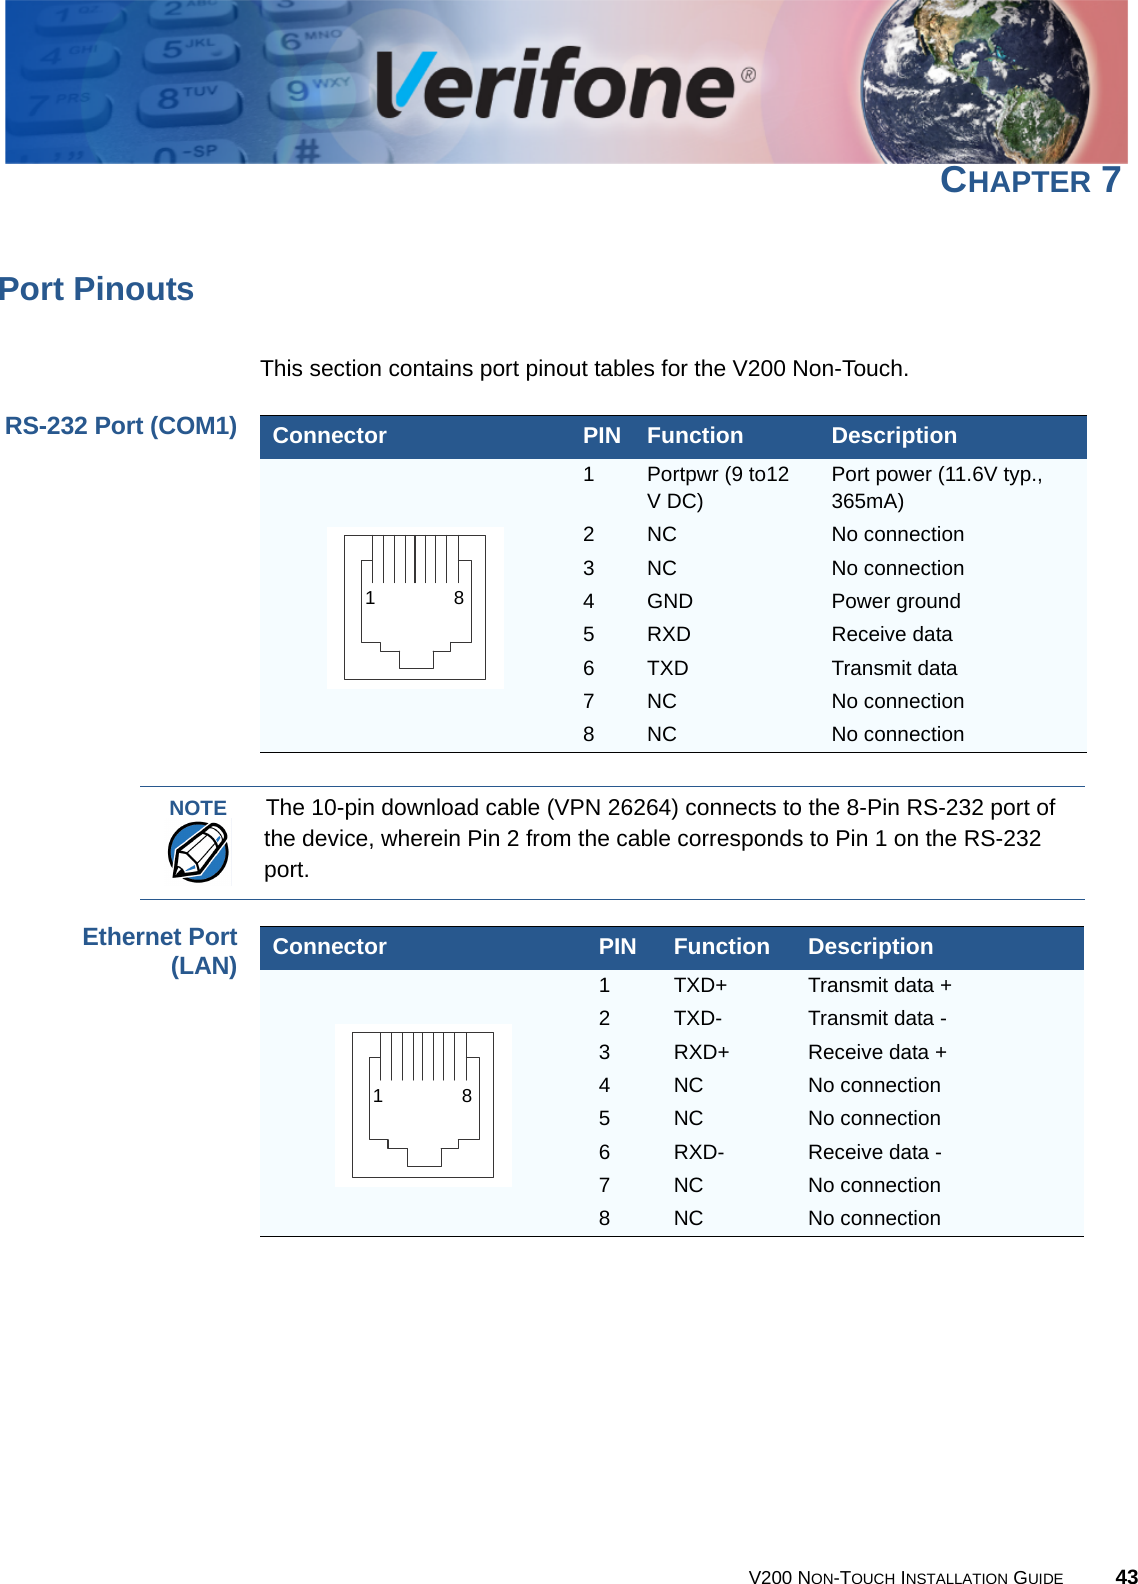 V200 NON-TOUCH INSTALLATION GUIDE 43CHAPTER 7Port PinoutsThis section contains port pinout tables for the V200 Non-Touch.RS-232 Port (COM1)Ethernet Port(LAN)Connector PIN Function Description1Portpwr (9 to12 V DC)Port power (11.6V typ., 365mA)2NC No connection3NC No connection4GND Power ground5RXD Receive data6TXD Transmit data7NC No connection8NC No connection18NOTEThe 10-pin download cable (VPN 26264) connects to the 8-Pin RS-232 port of the device, wherein Pin 2 from the cable corresponds to Pin 1 on the RS-232 port.Connector PIN Function Description1TXD+ Transmit data +2TXD- Transmit data -3RXD+ Receive data +4NC No connection5NC No connection6RXD- Receive data -7NC No connection8NC No connection18